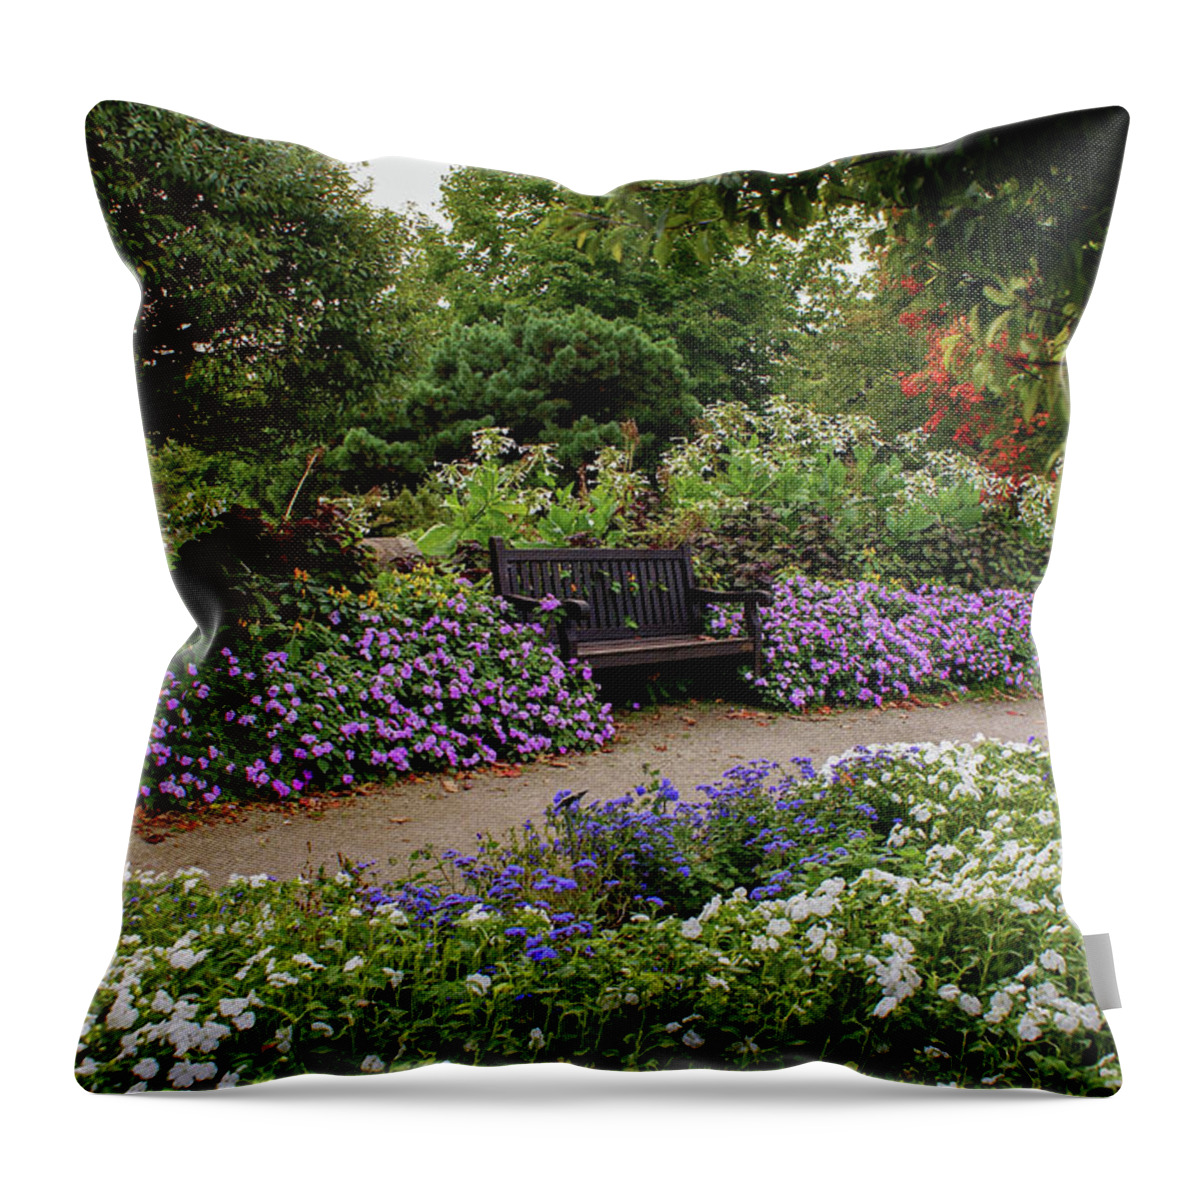 Boerner Botanical Gardens Throw Pillow featuring the photograph Flower Seating by Deb Beausoleil